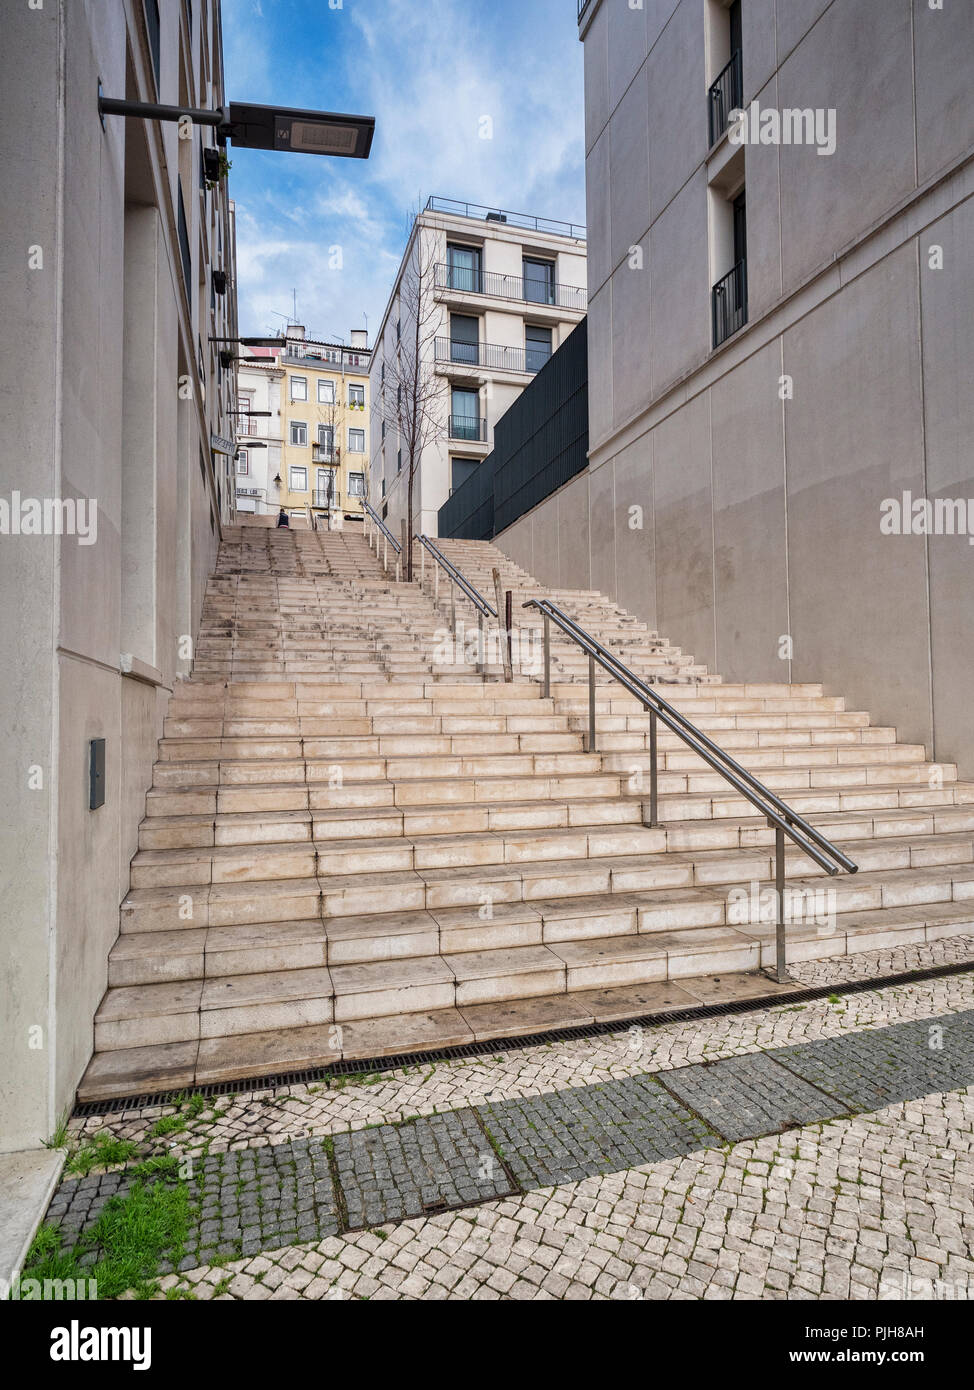 Lisbon, Portugal - Steps, typical of those seen throughout Lisbon, a city built on seven hills. Stock Photo